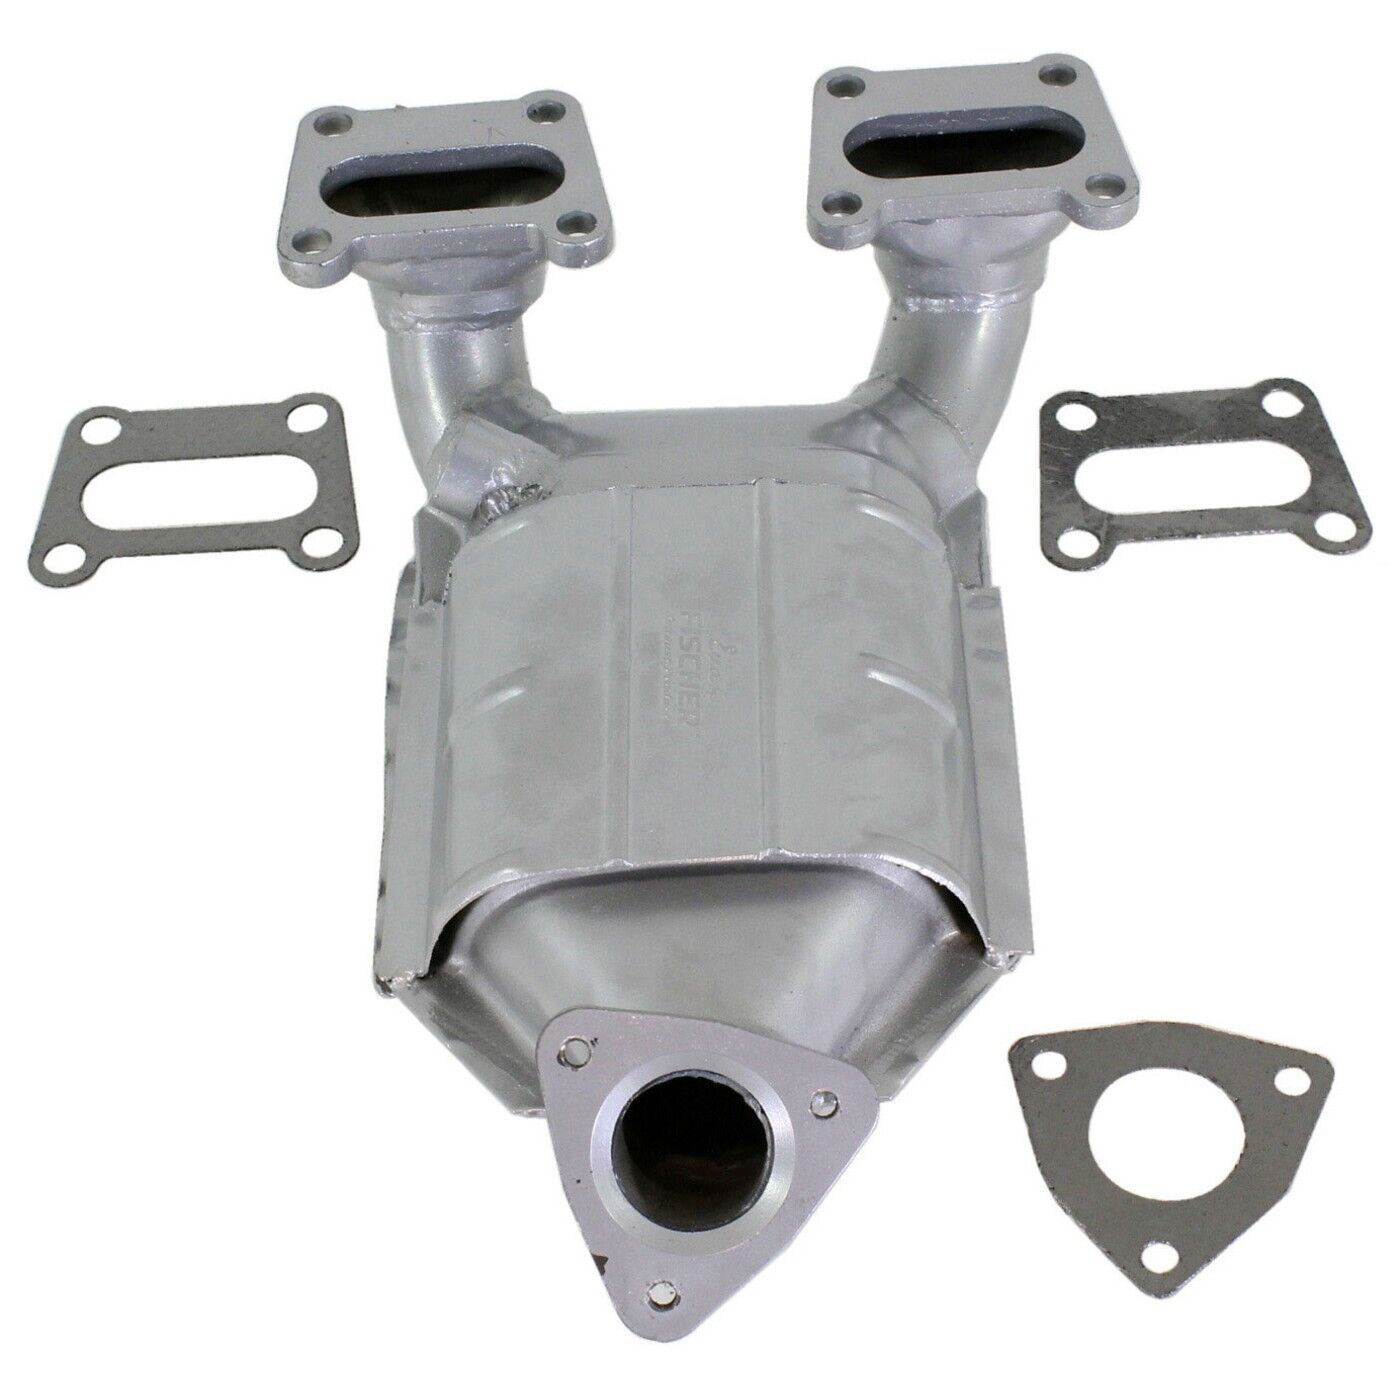 New Catalytic Converter for 1995-1998 Nissan 200S /Sentra Exhaust Manifold